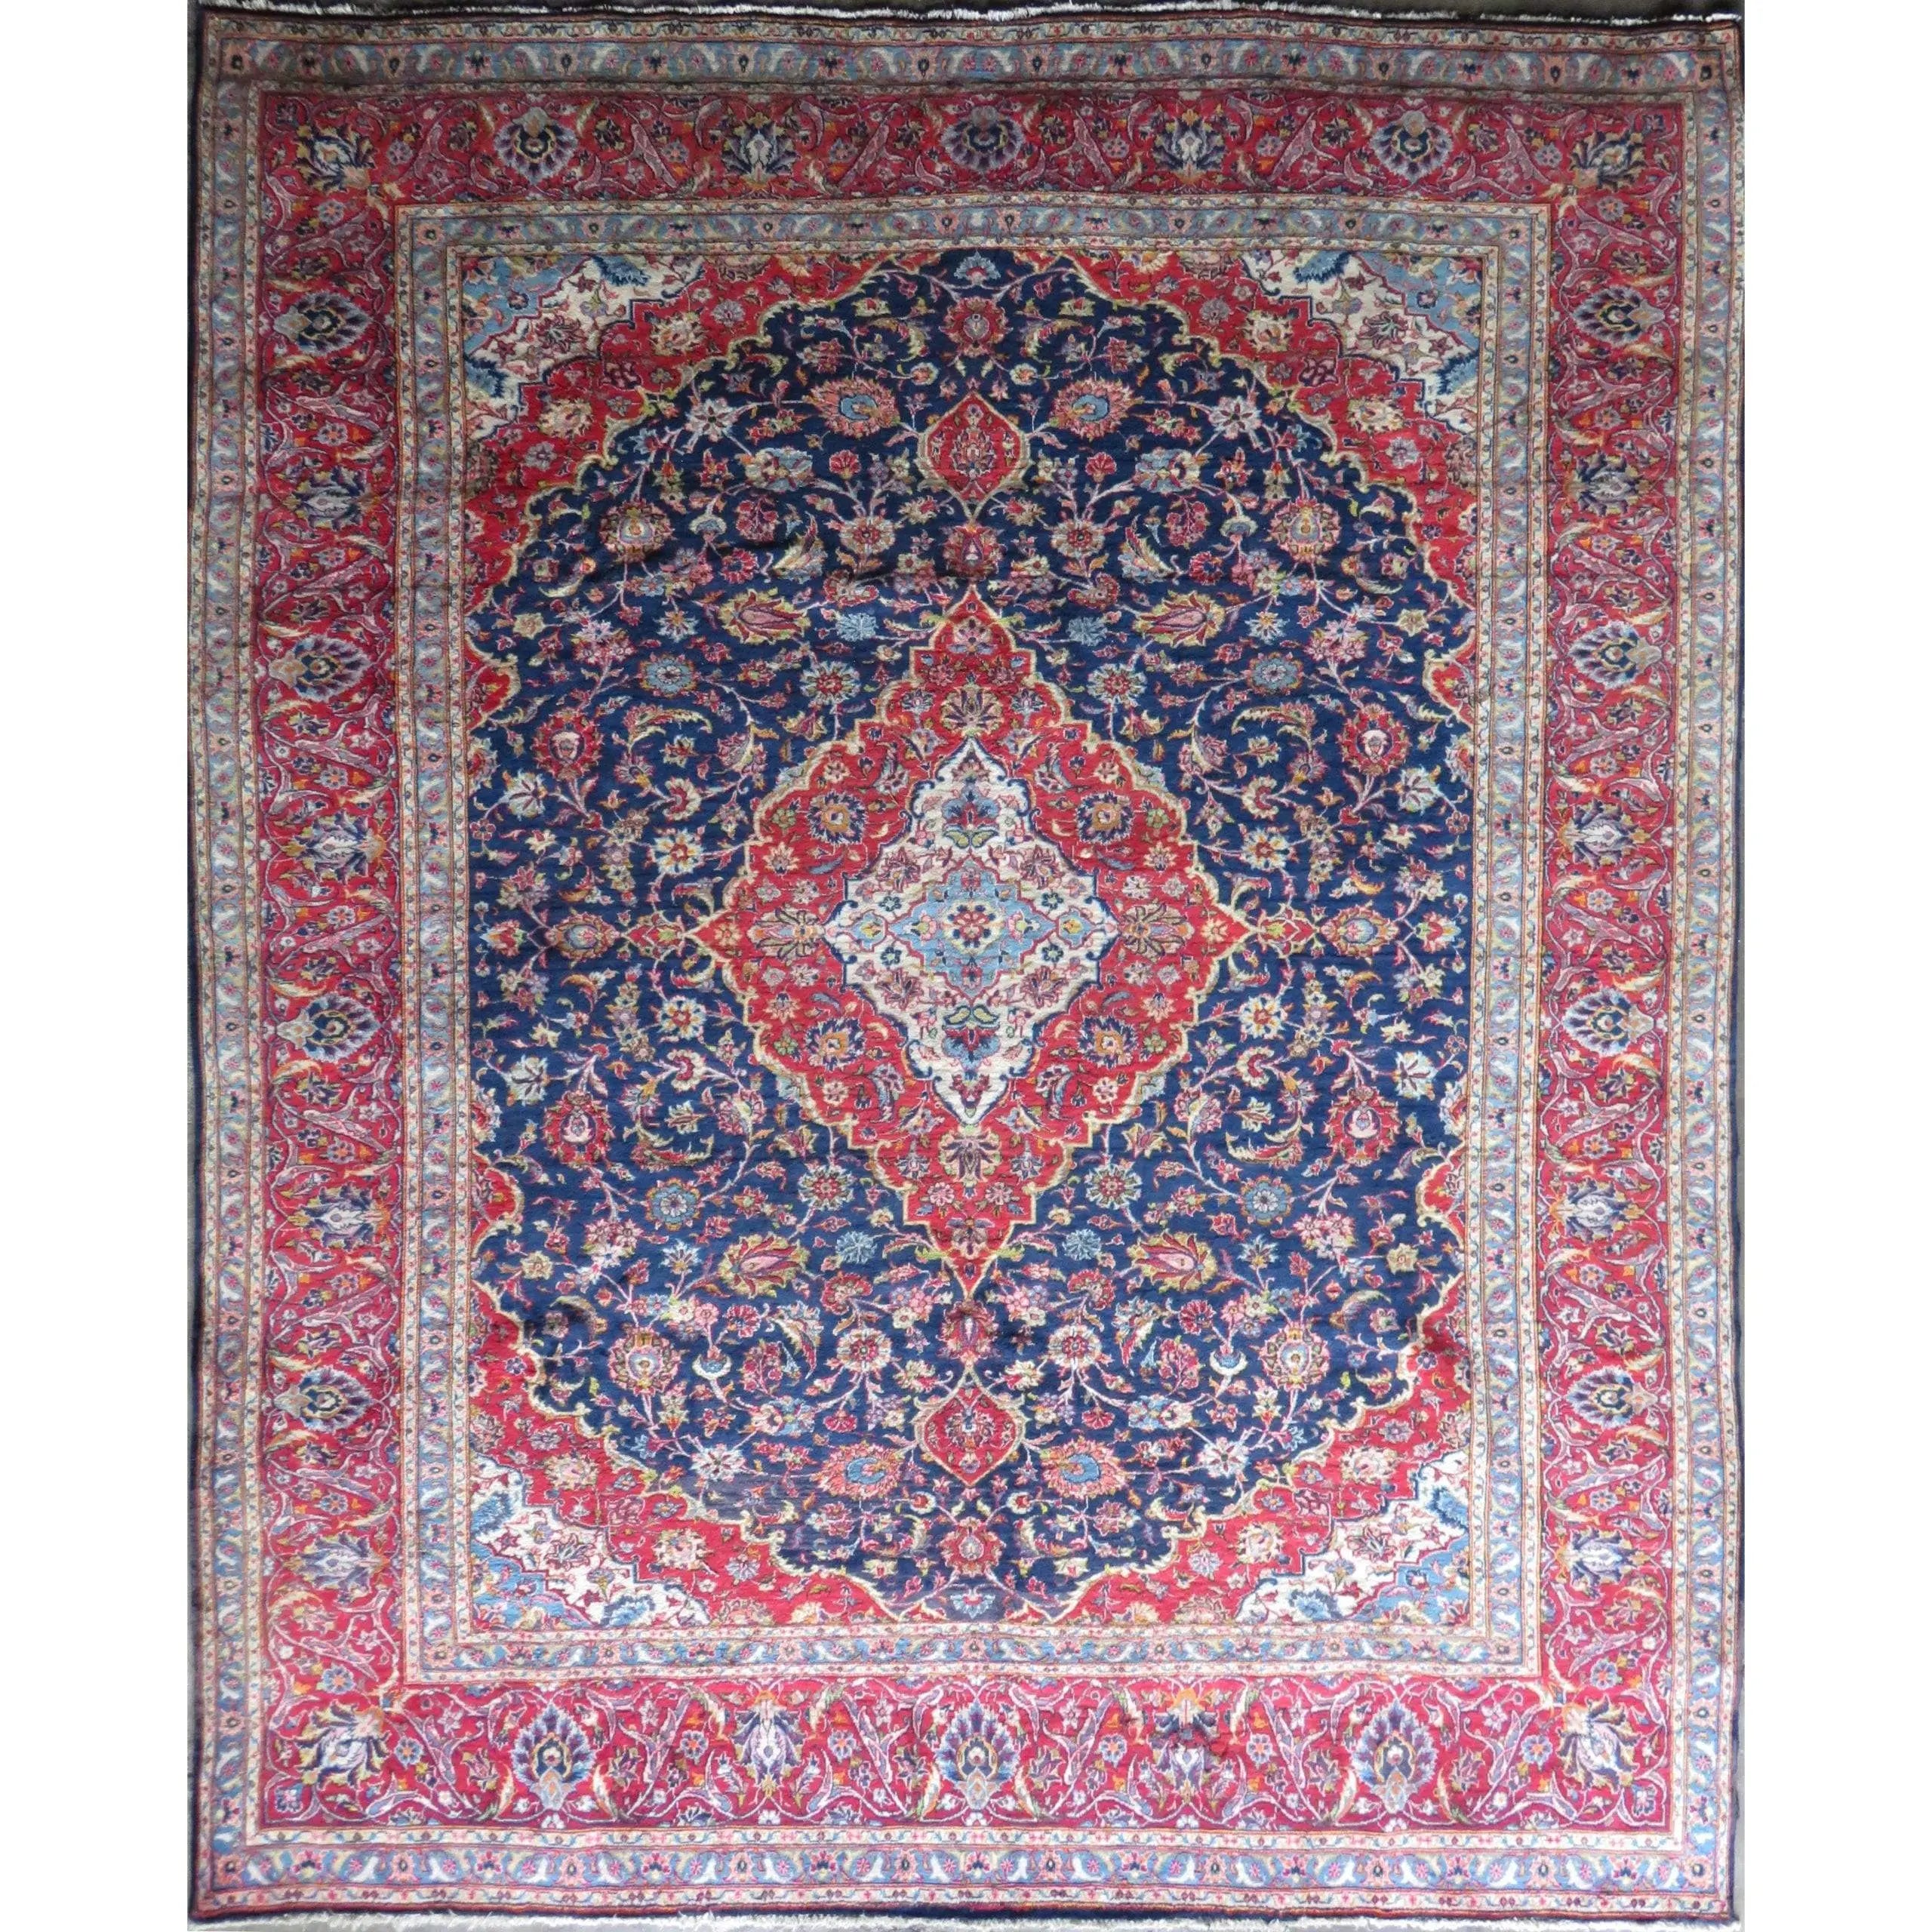 Hand-Knotted Vintage Rug 11'6" x 9'5"